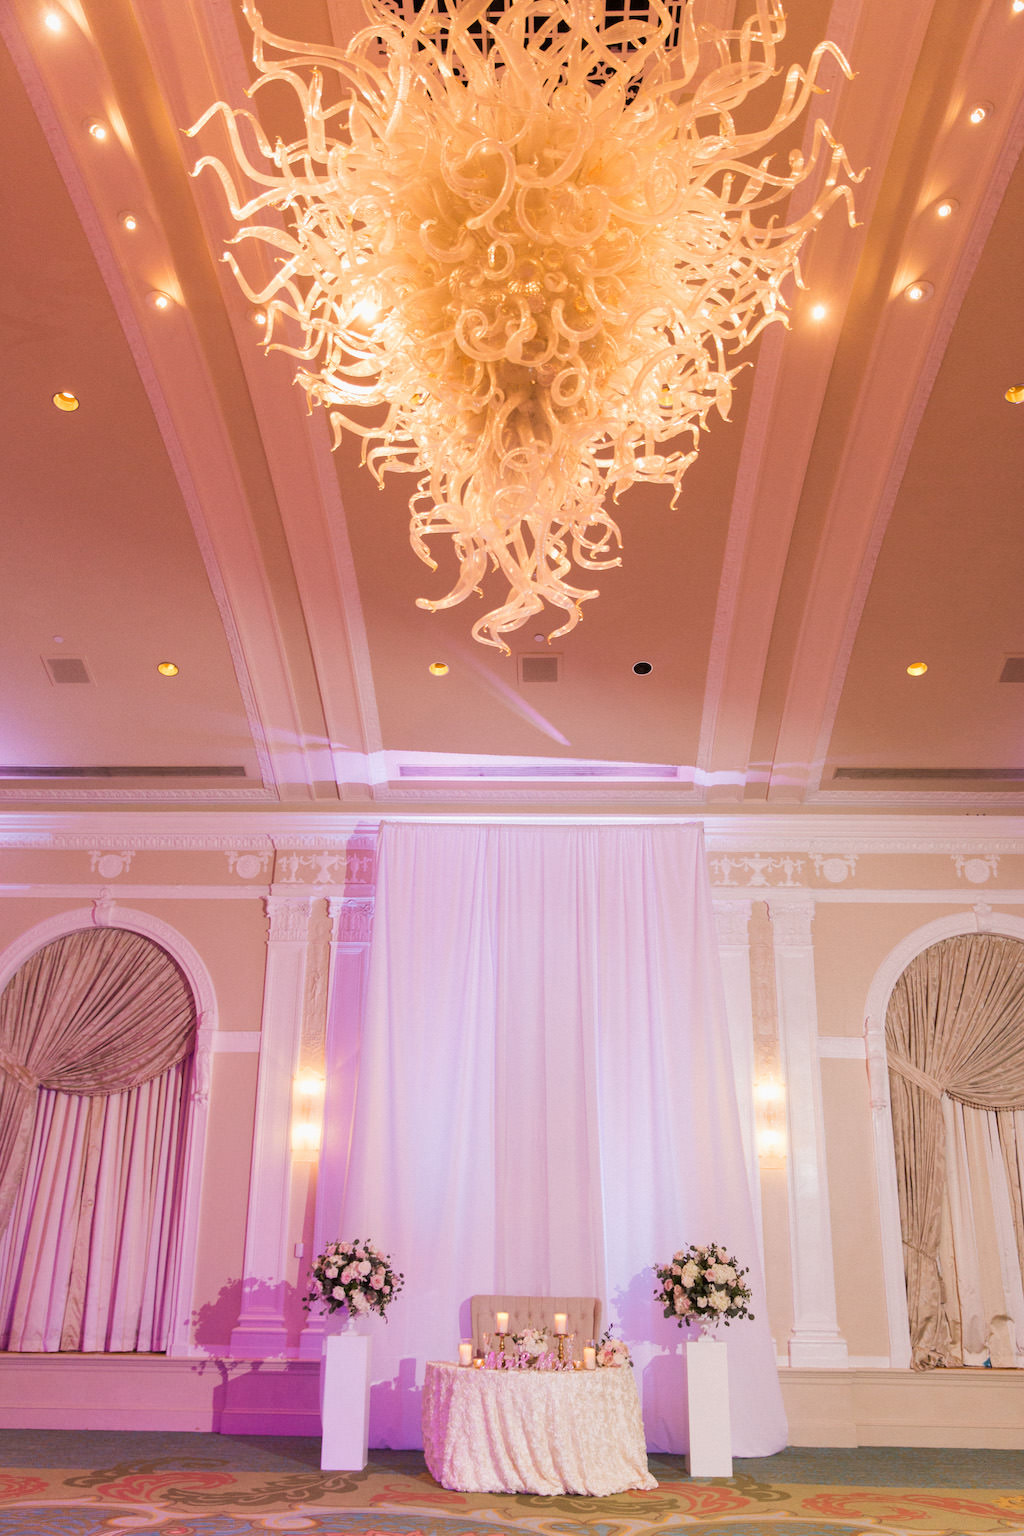 Wedding Reception Sweetheart Table with Large Round Flower Arrangements on White Pedestals and Tall Candle Holders with Artistic Glass Chandelier | Tampa Bay Hotel Ballroom Wedding Venue The Vinoy Renaissance | St Pete Wedding Planner Parties A La Carte